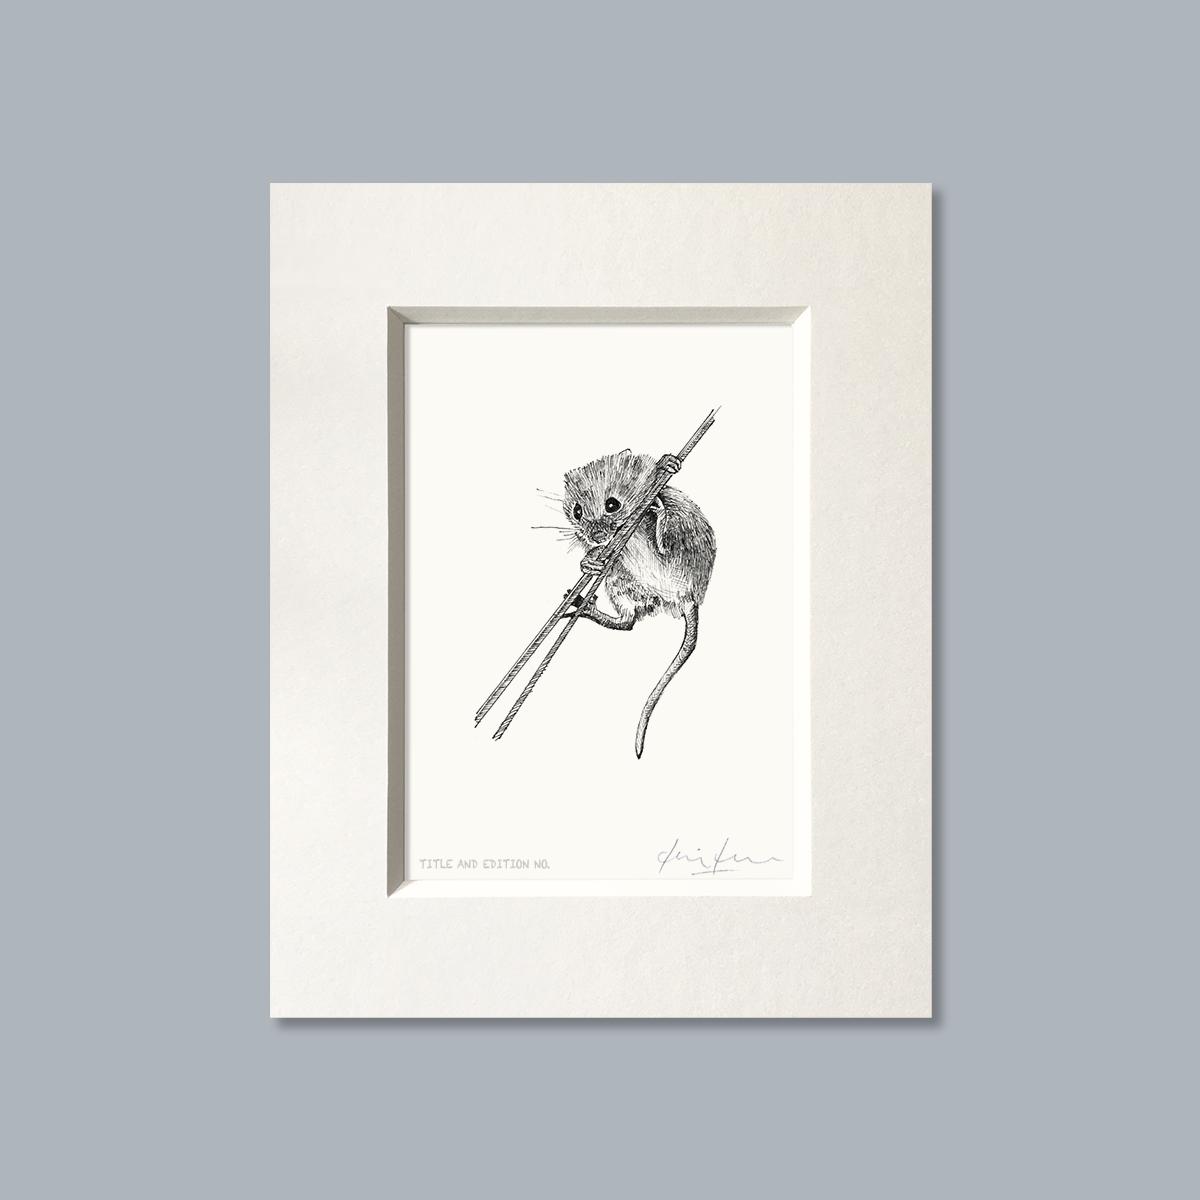 Limited edition print from pen and ink drawing of a harvest mouse, mounted